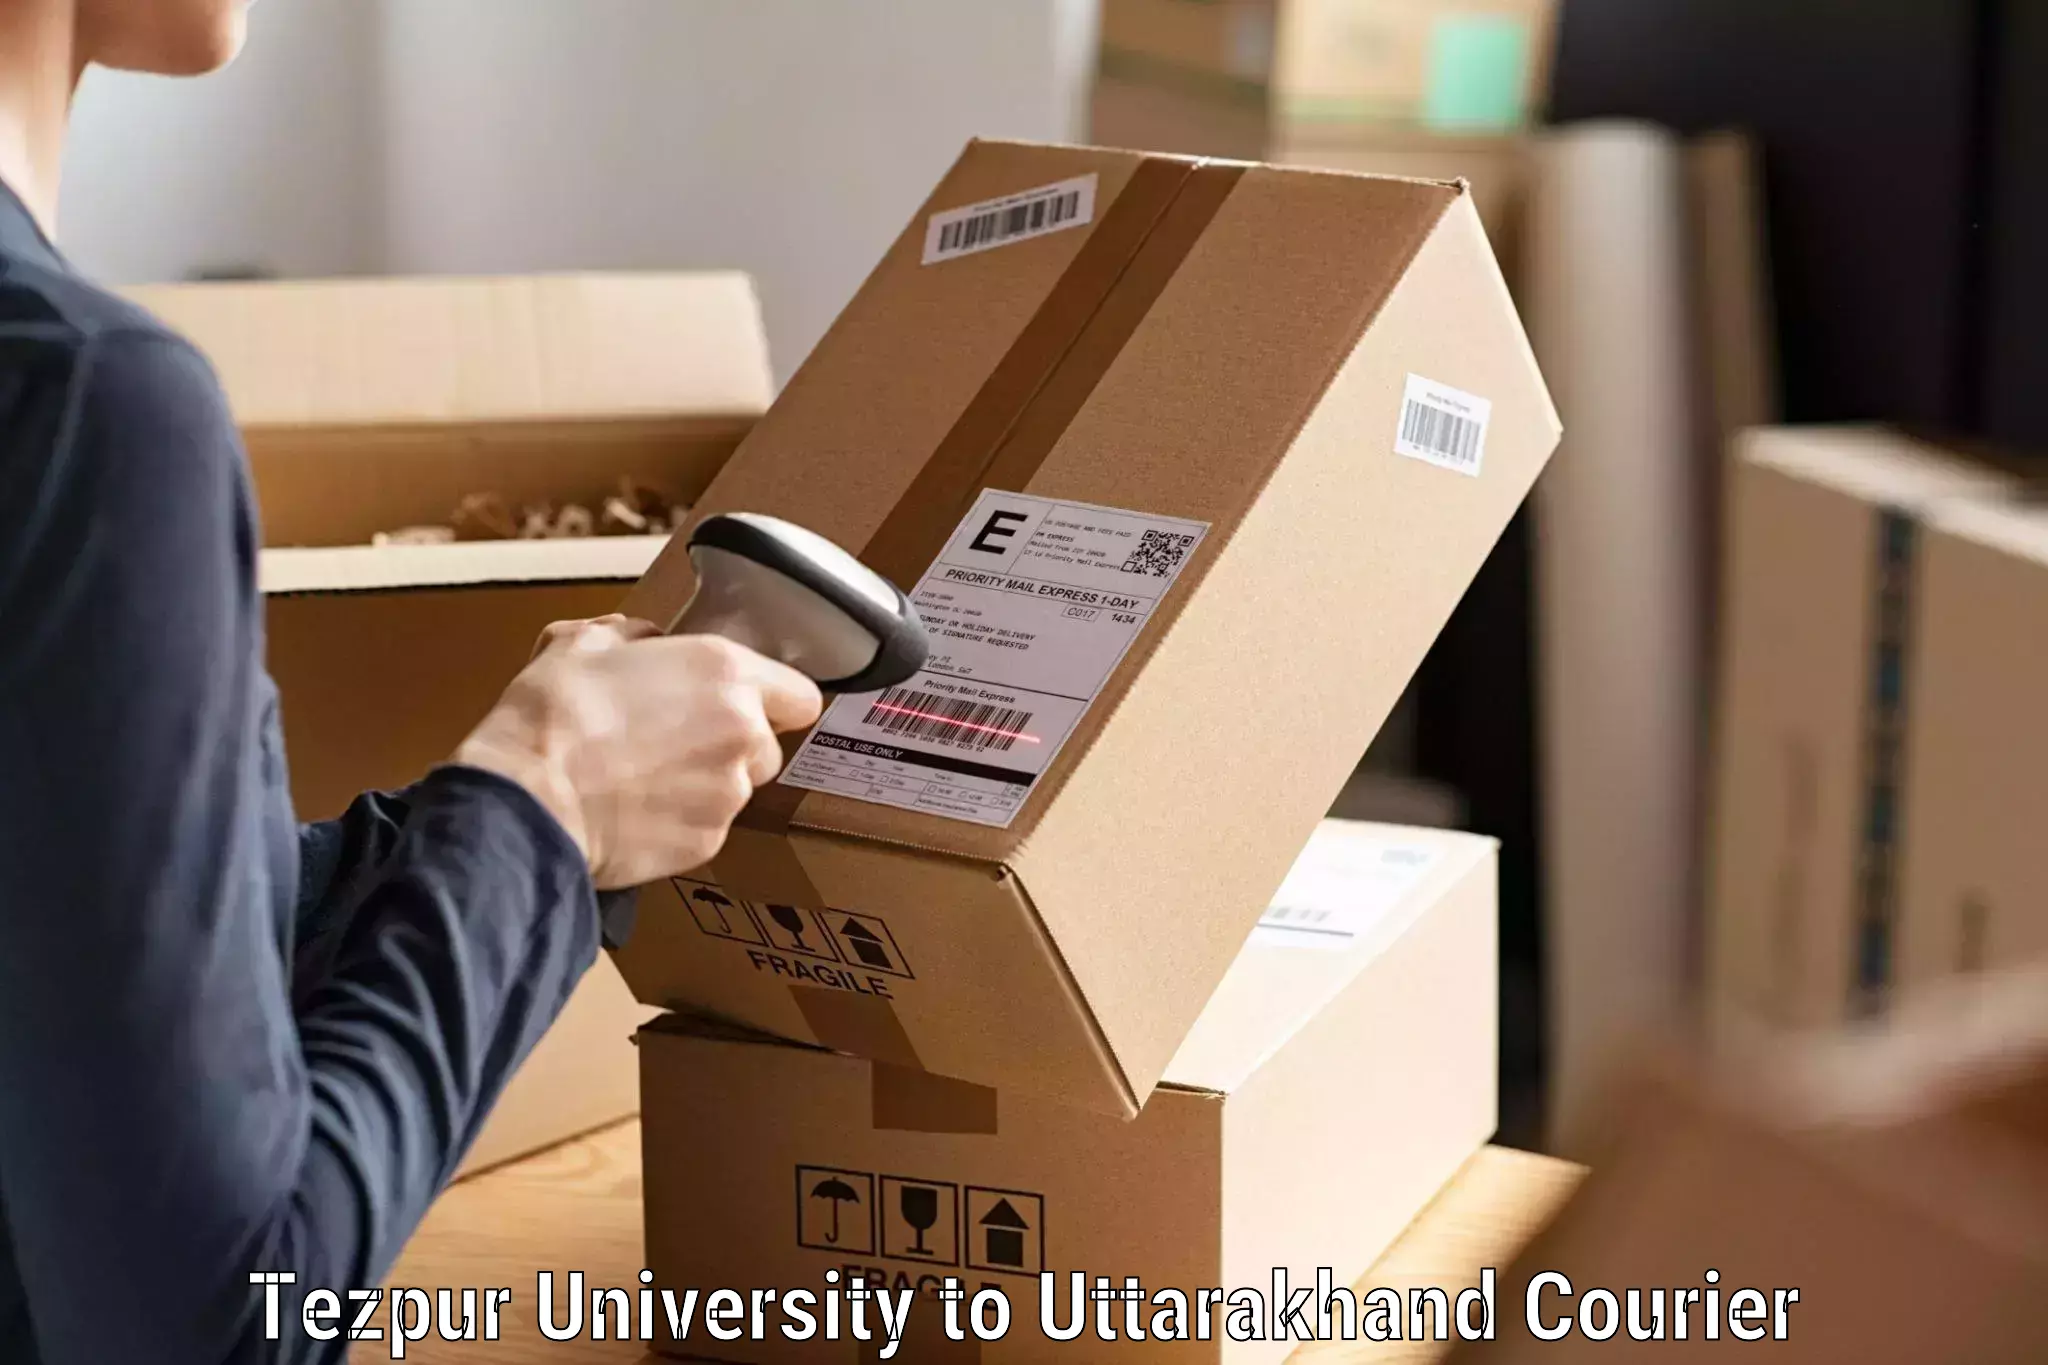 Express logistics providers in Tezpur University to Mussoorie